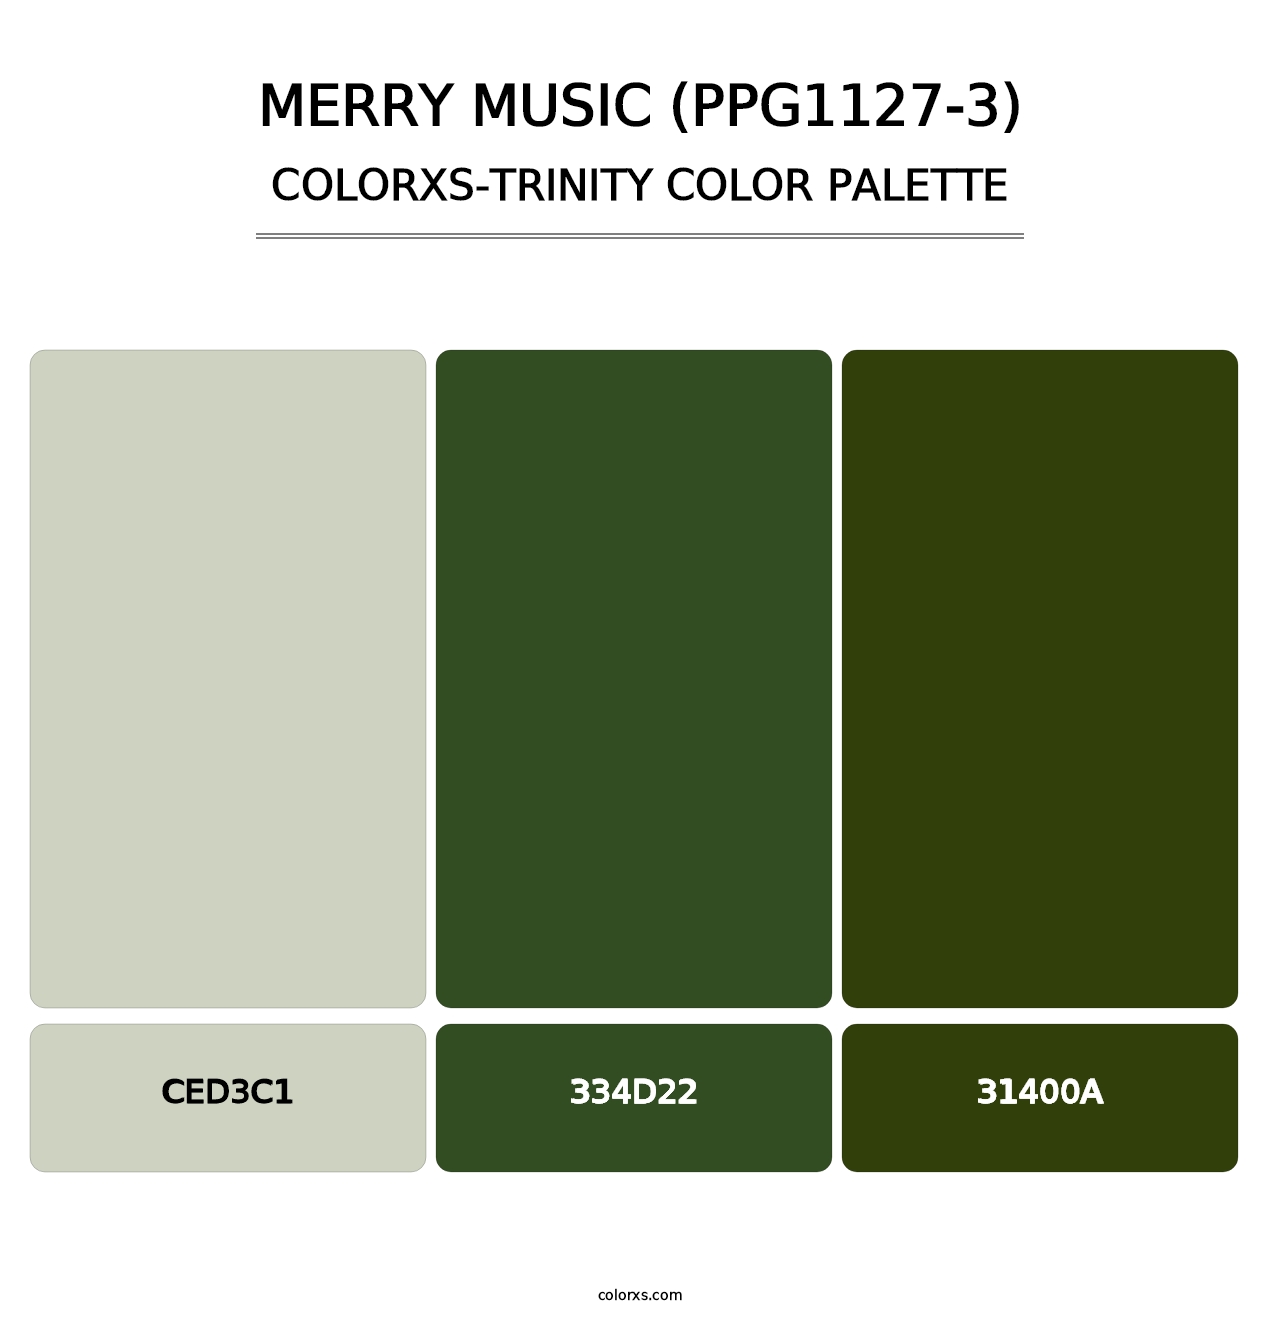 Merry Music (PPG1127-3) - Colorxs Trinity Palette